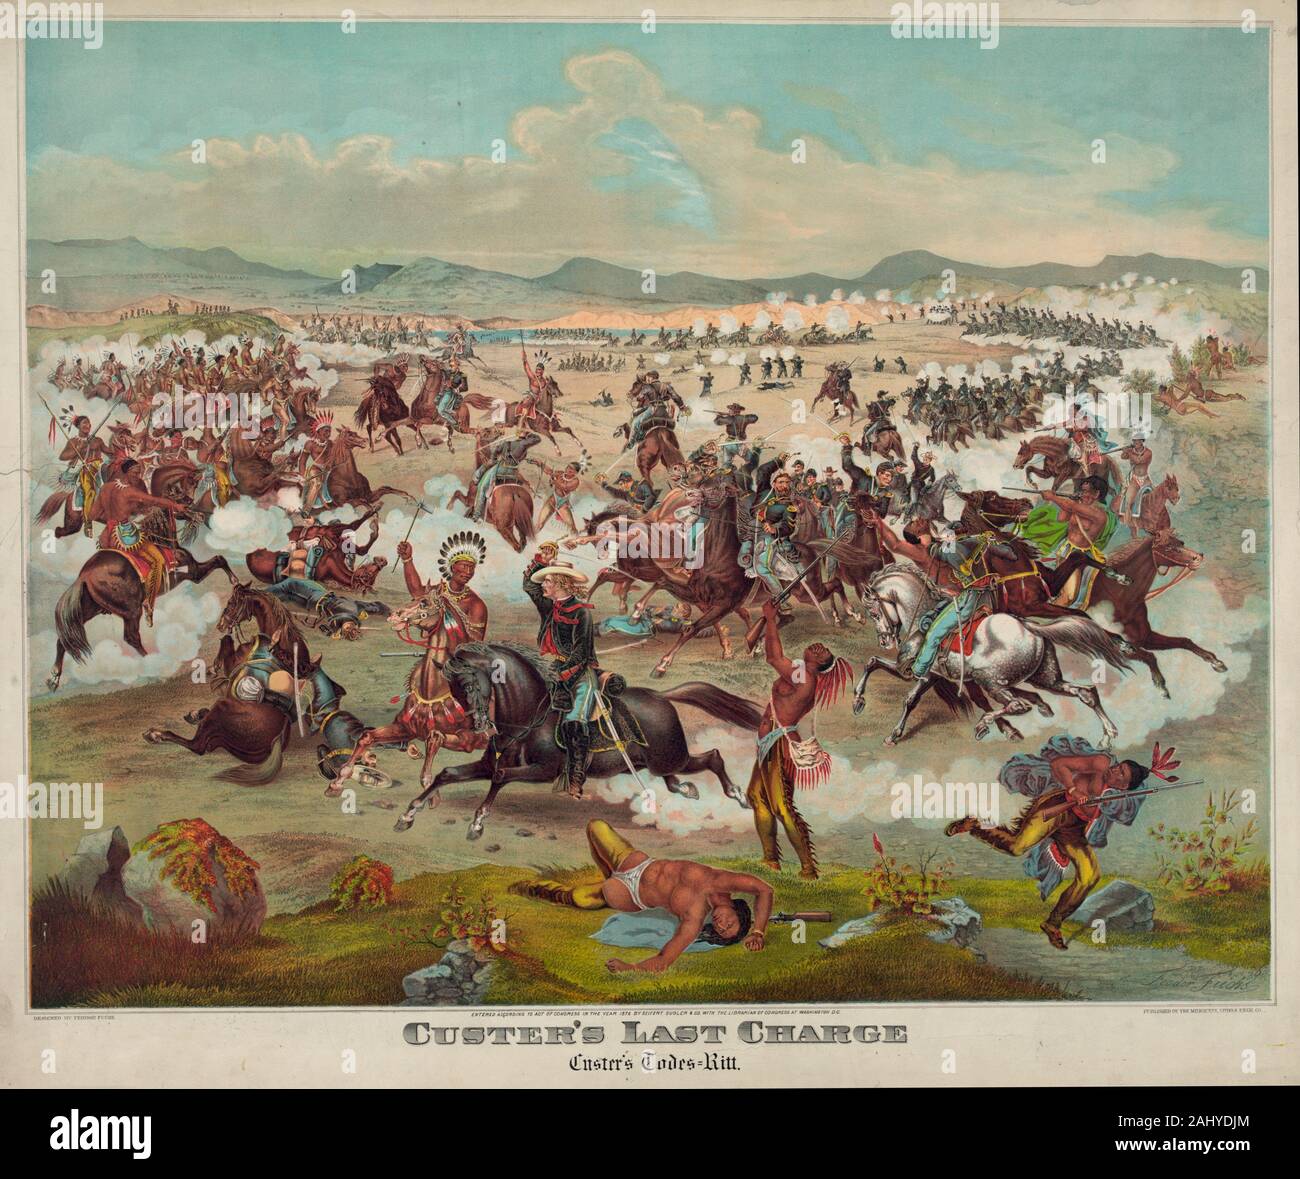 Custer's Last Charge, Battle of the Little Bighorn, 1876 Stock Photo